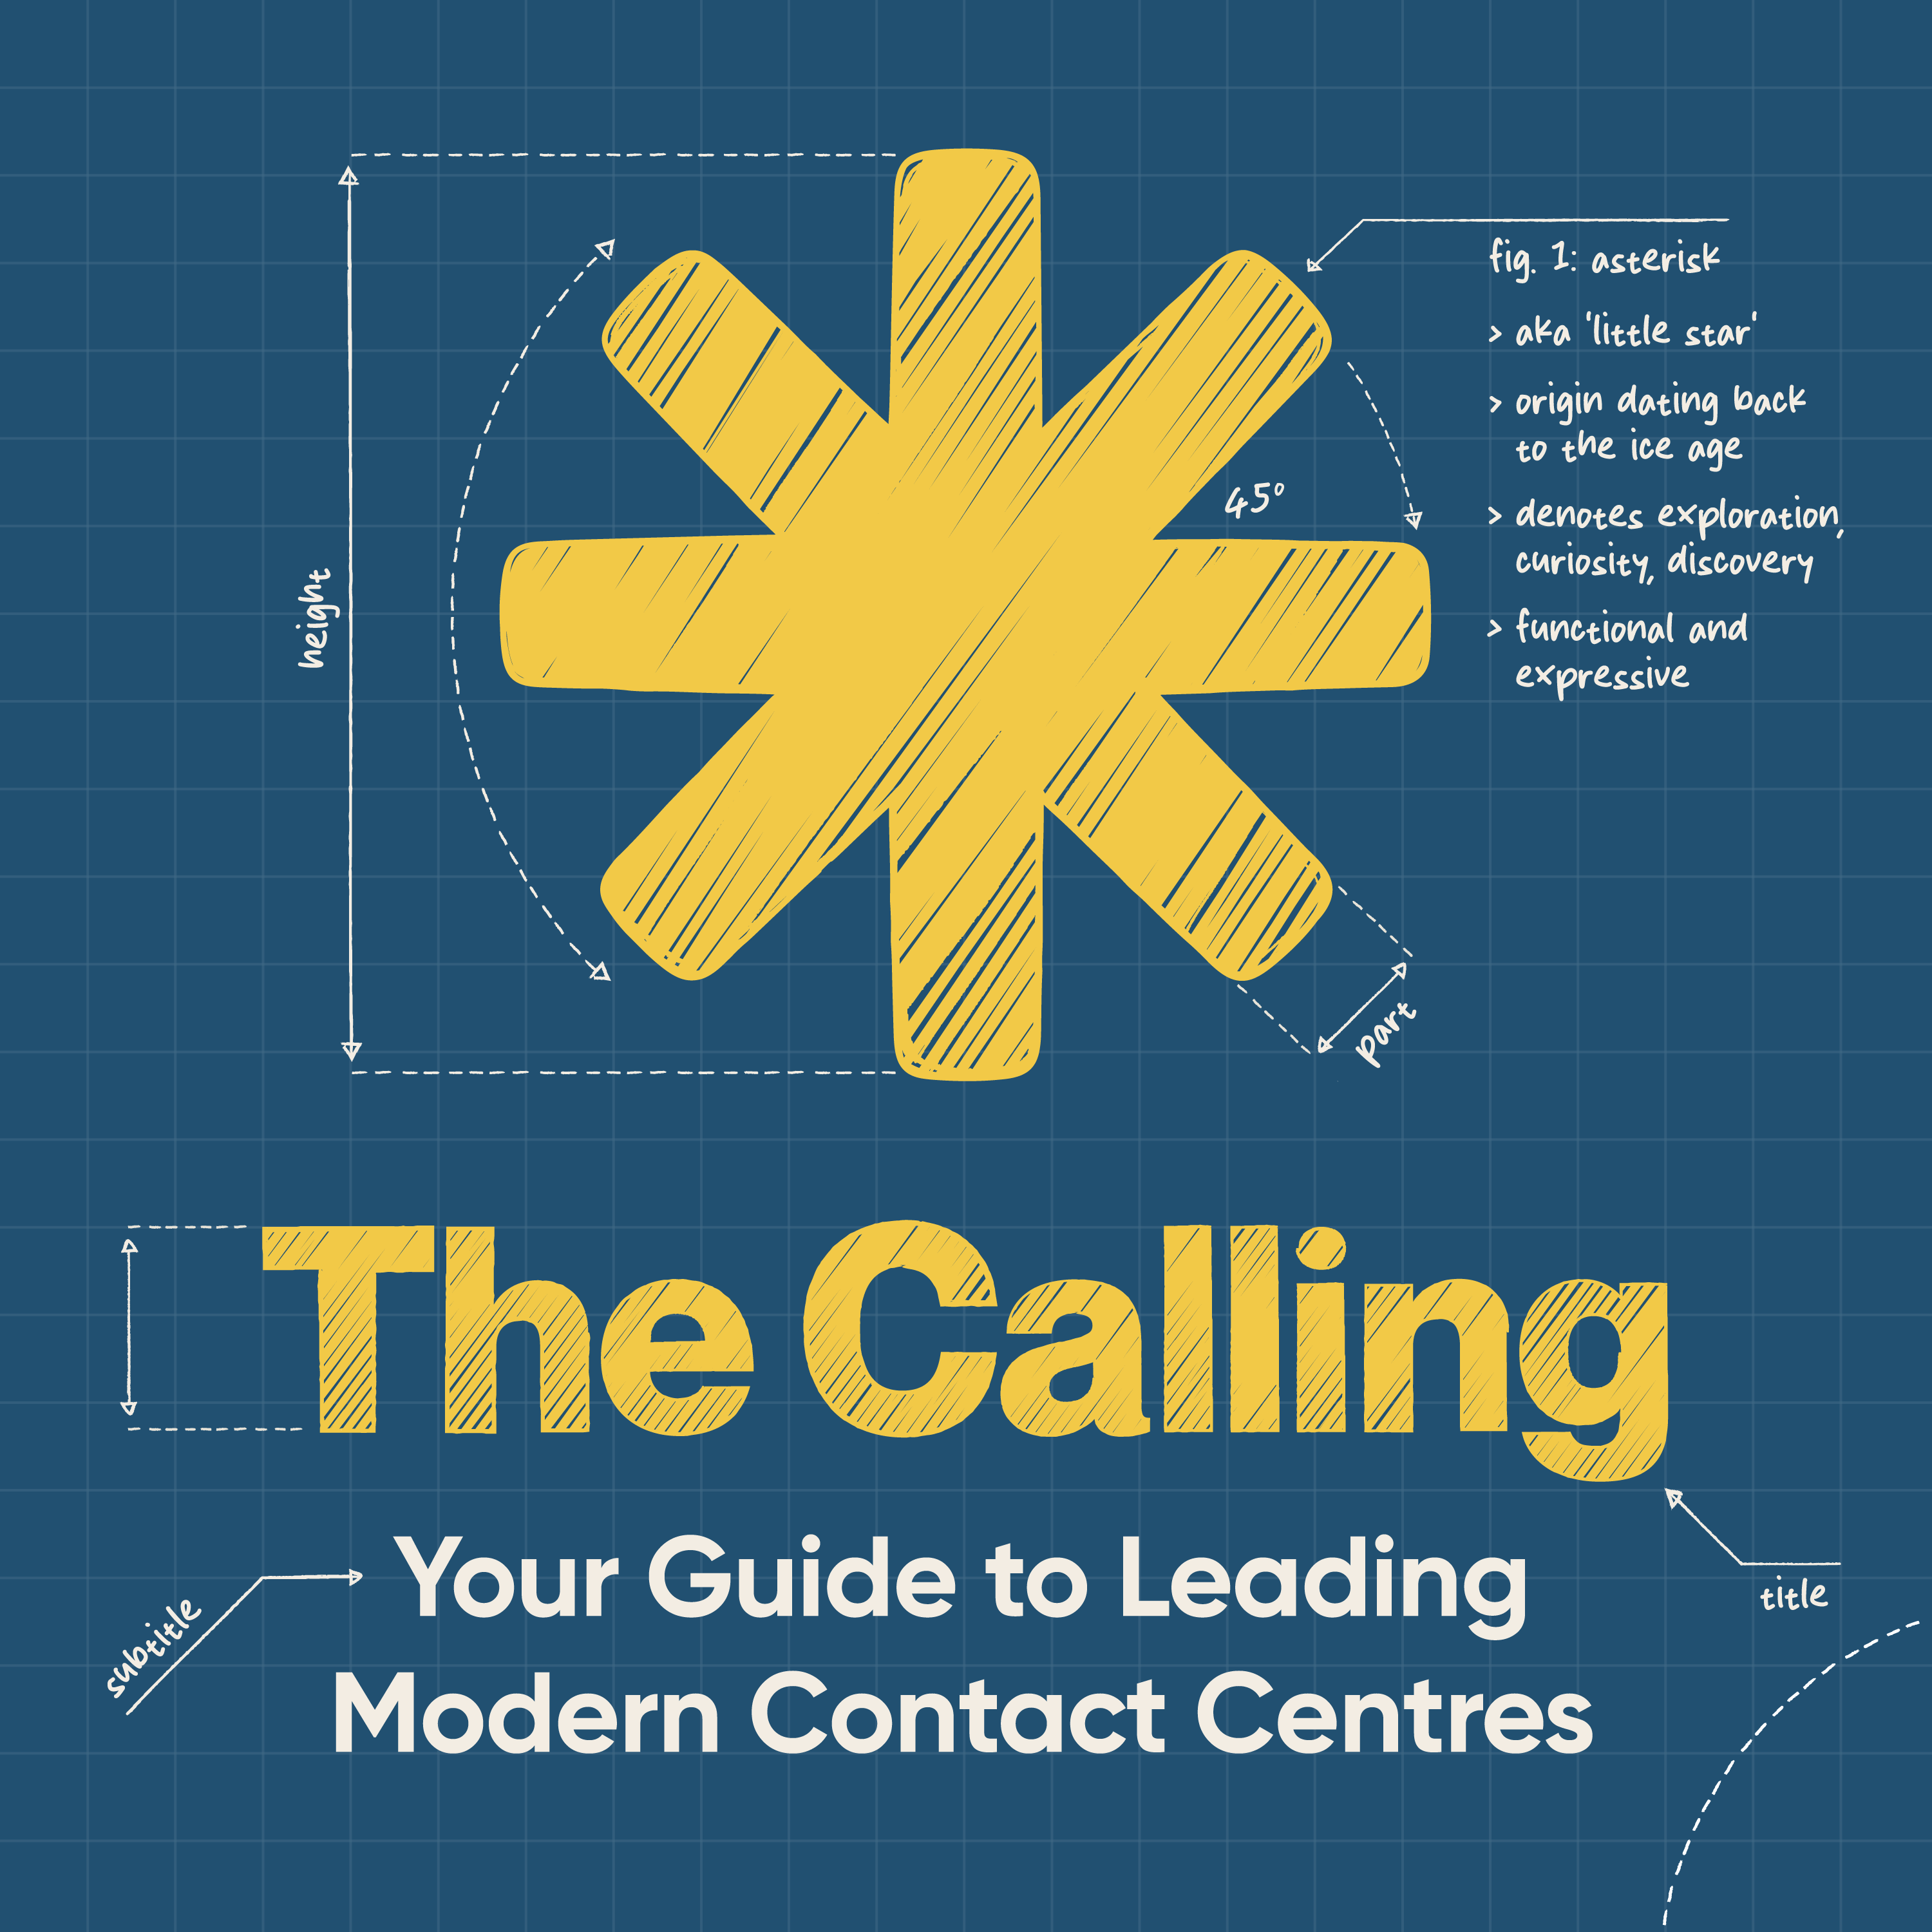 Introducing 'The Calling'